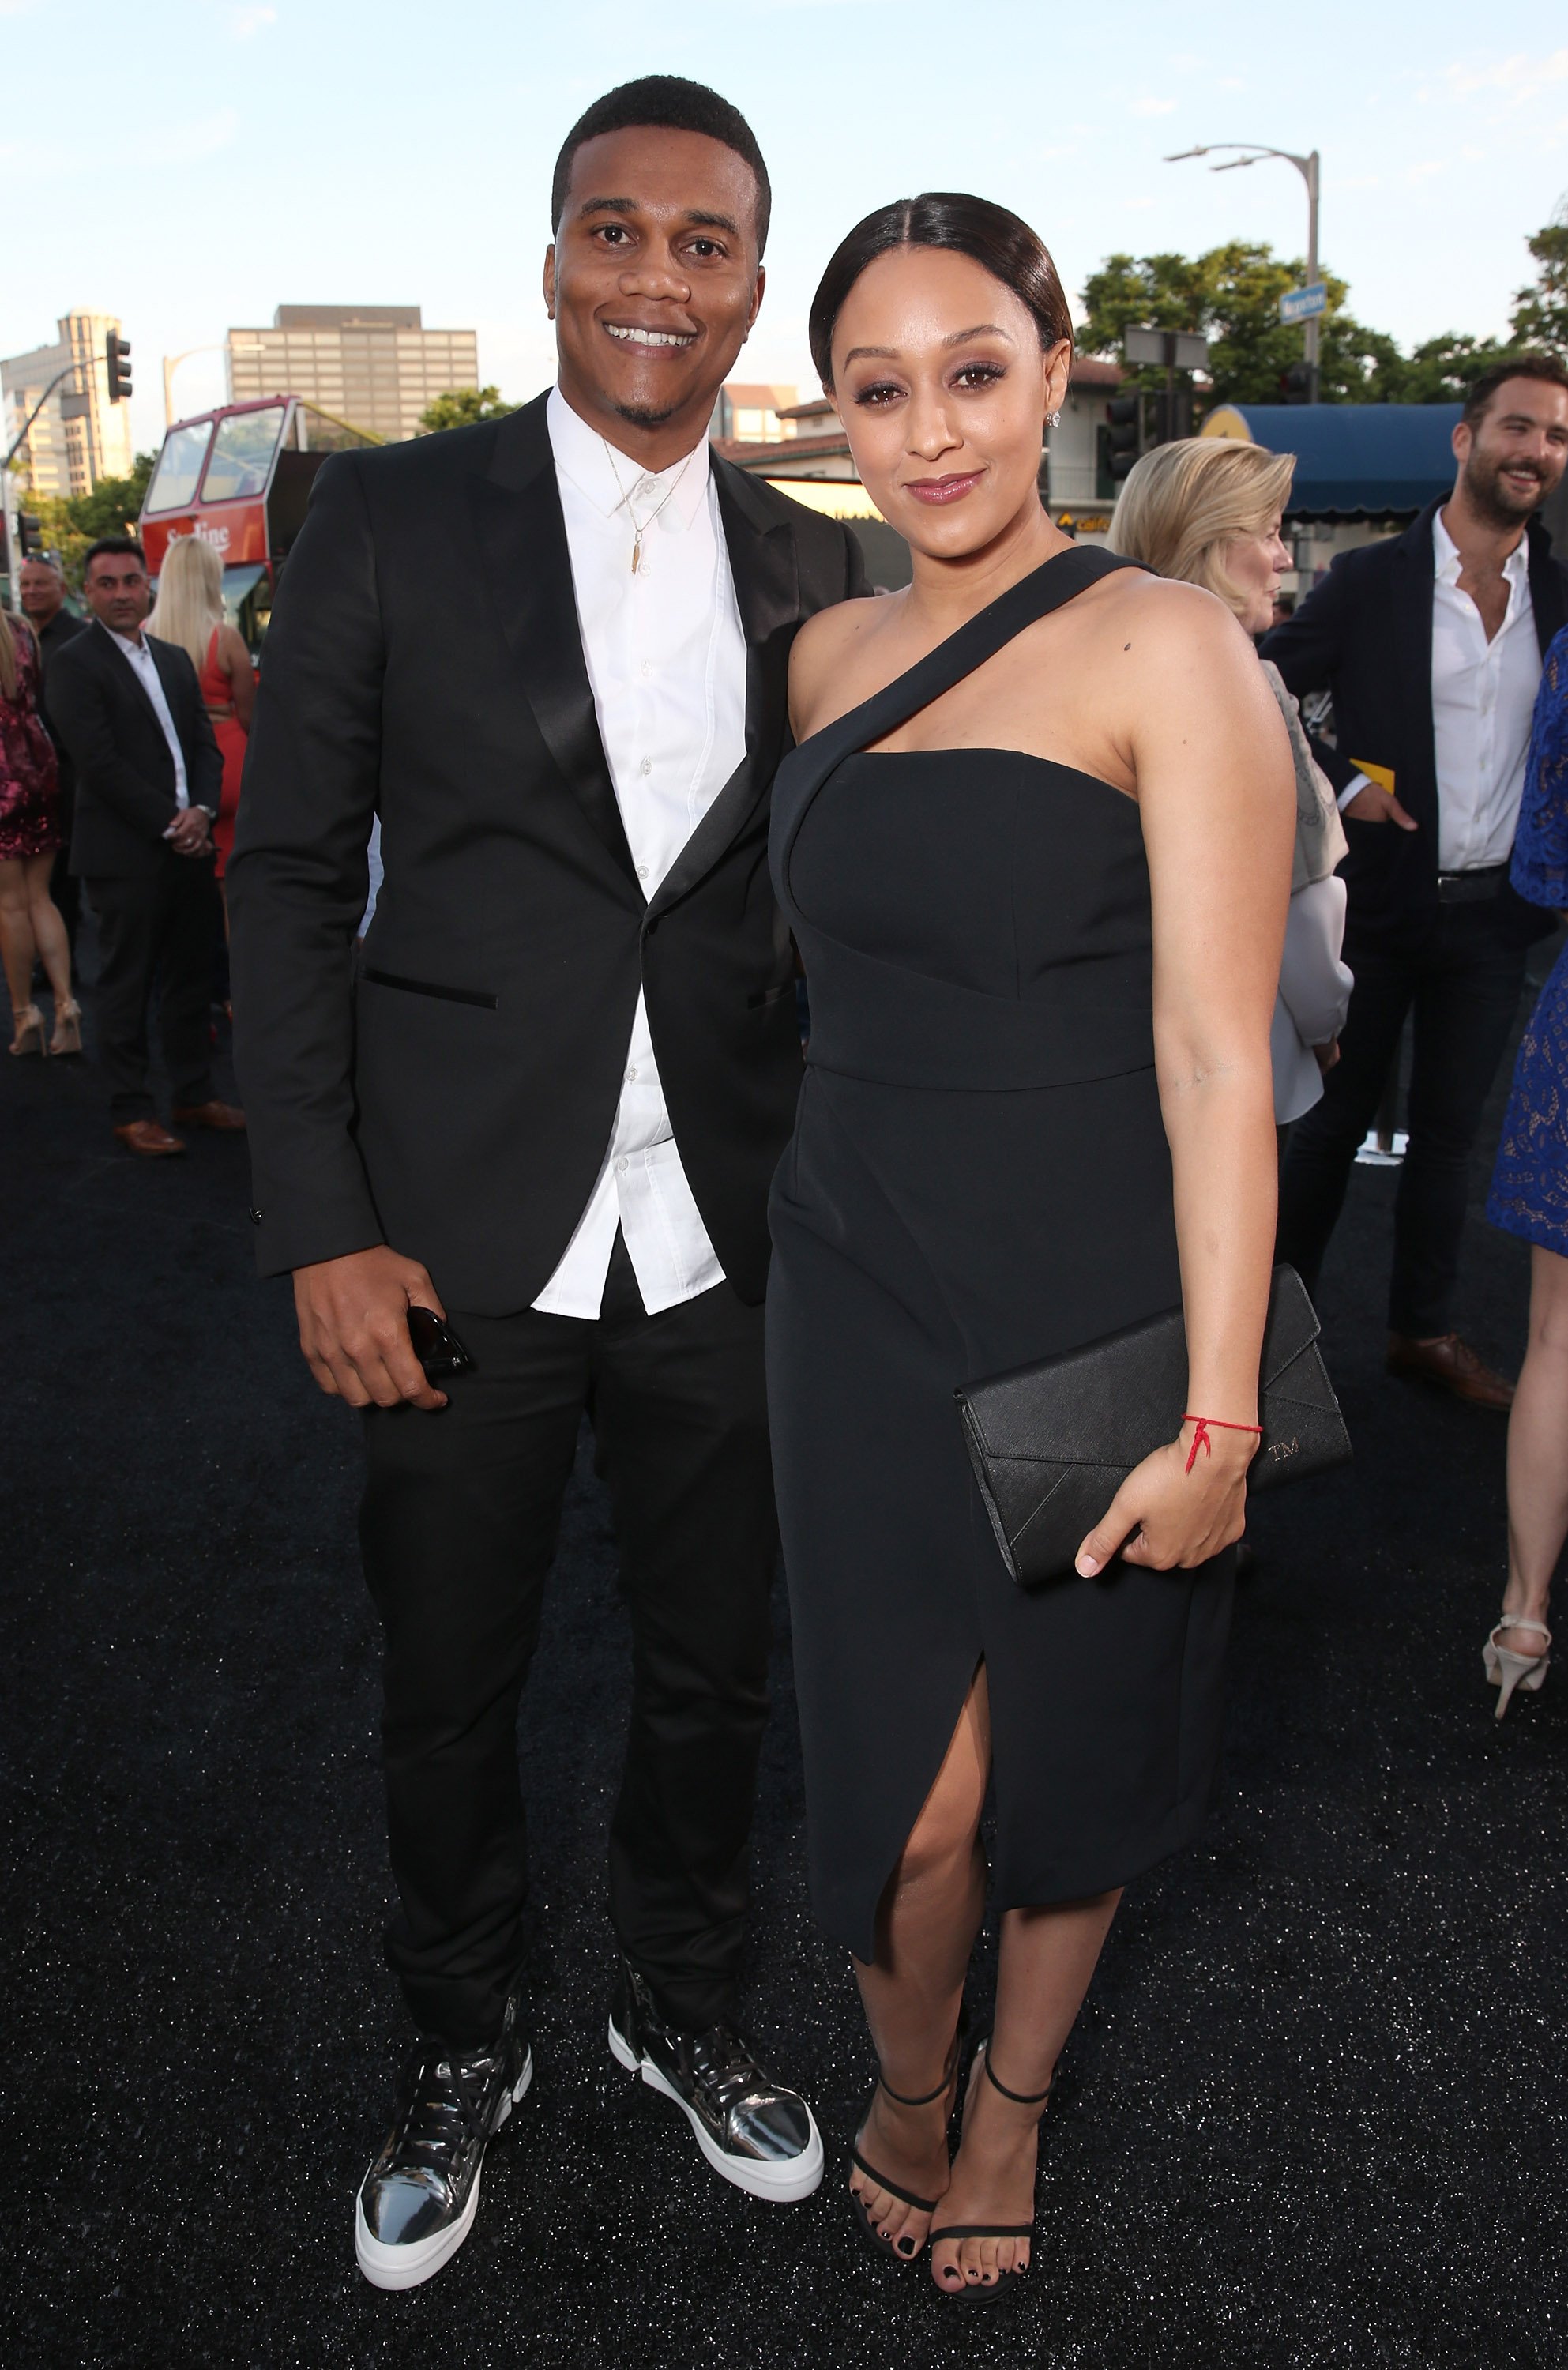 Cory Hardrict & Tia Mowry-Hardrict attend the premiere of "Central Intelligence" on June 10, 2016. | Photo: Getty Images